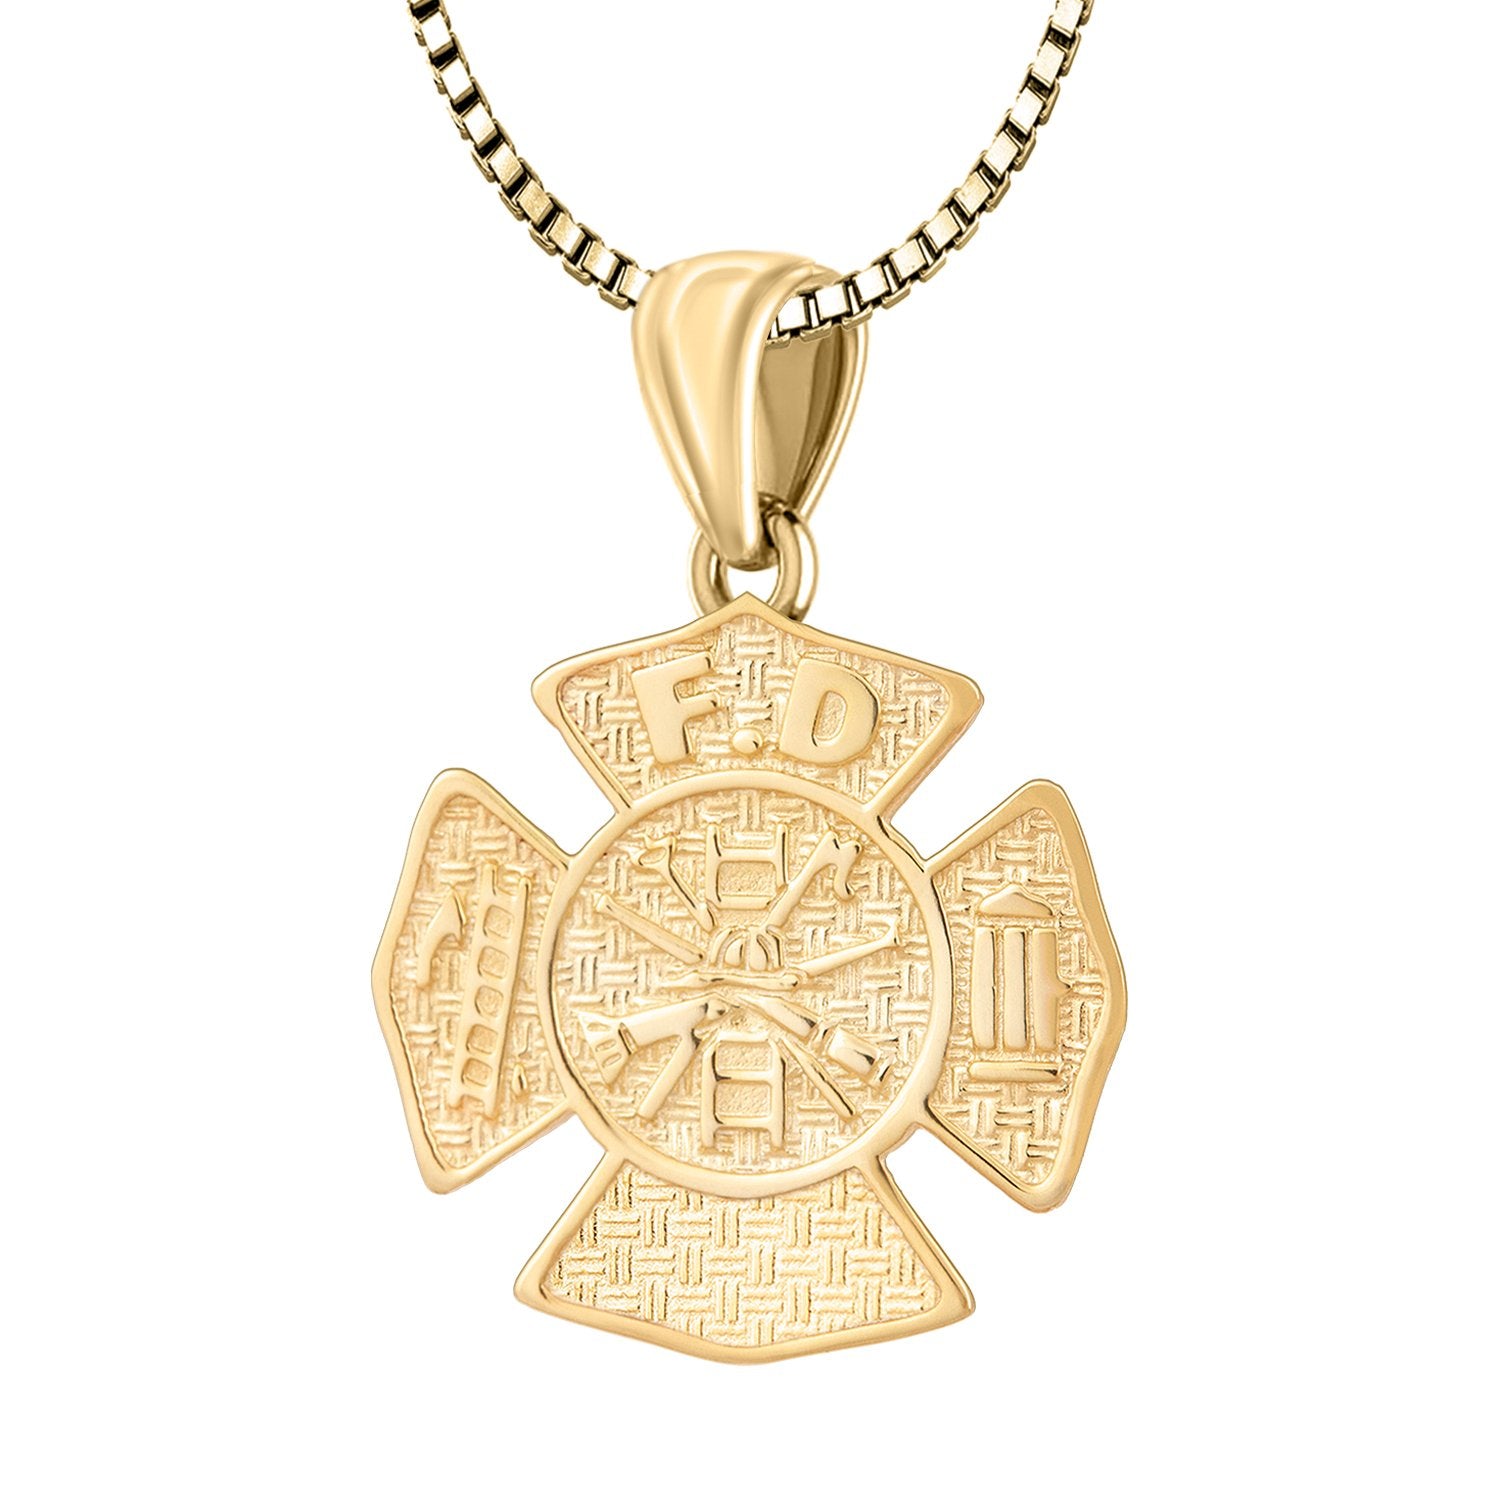 Firefighter Necklace of 26mm in 14k Gold - 1.5mm Box Chain